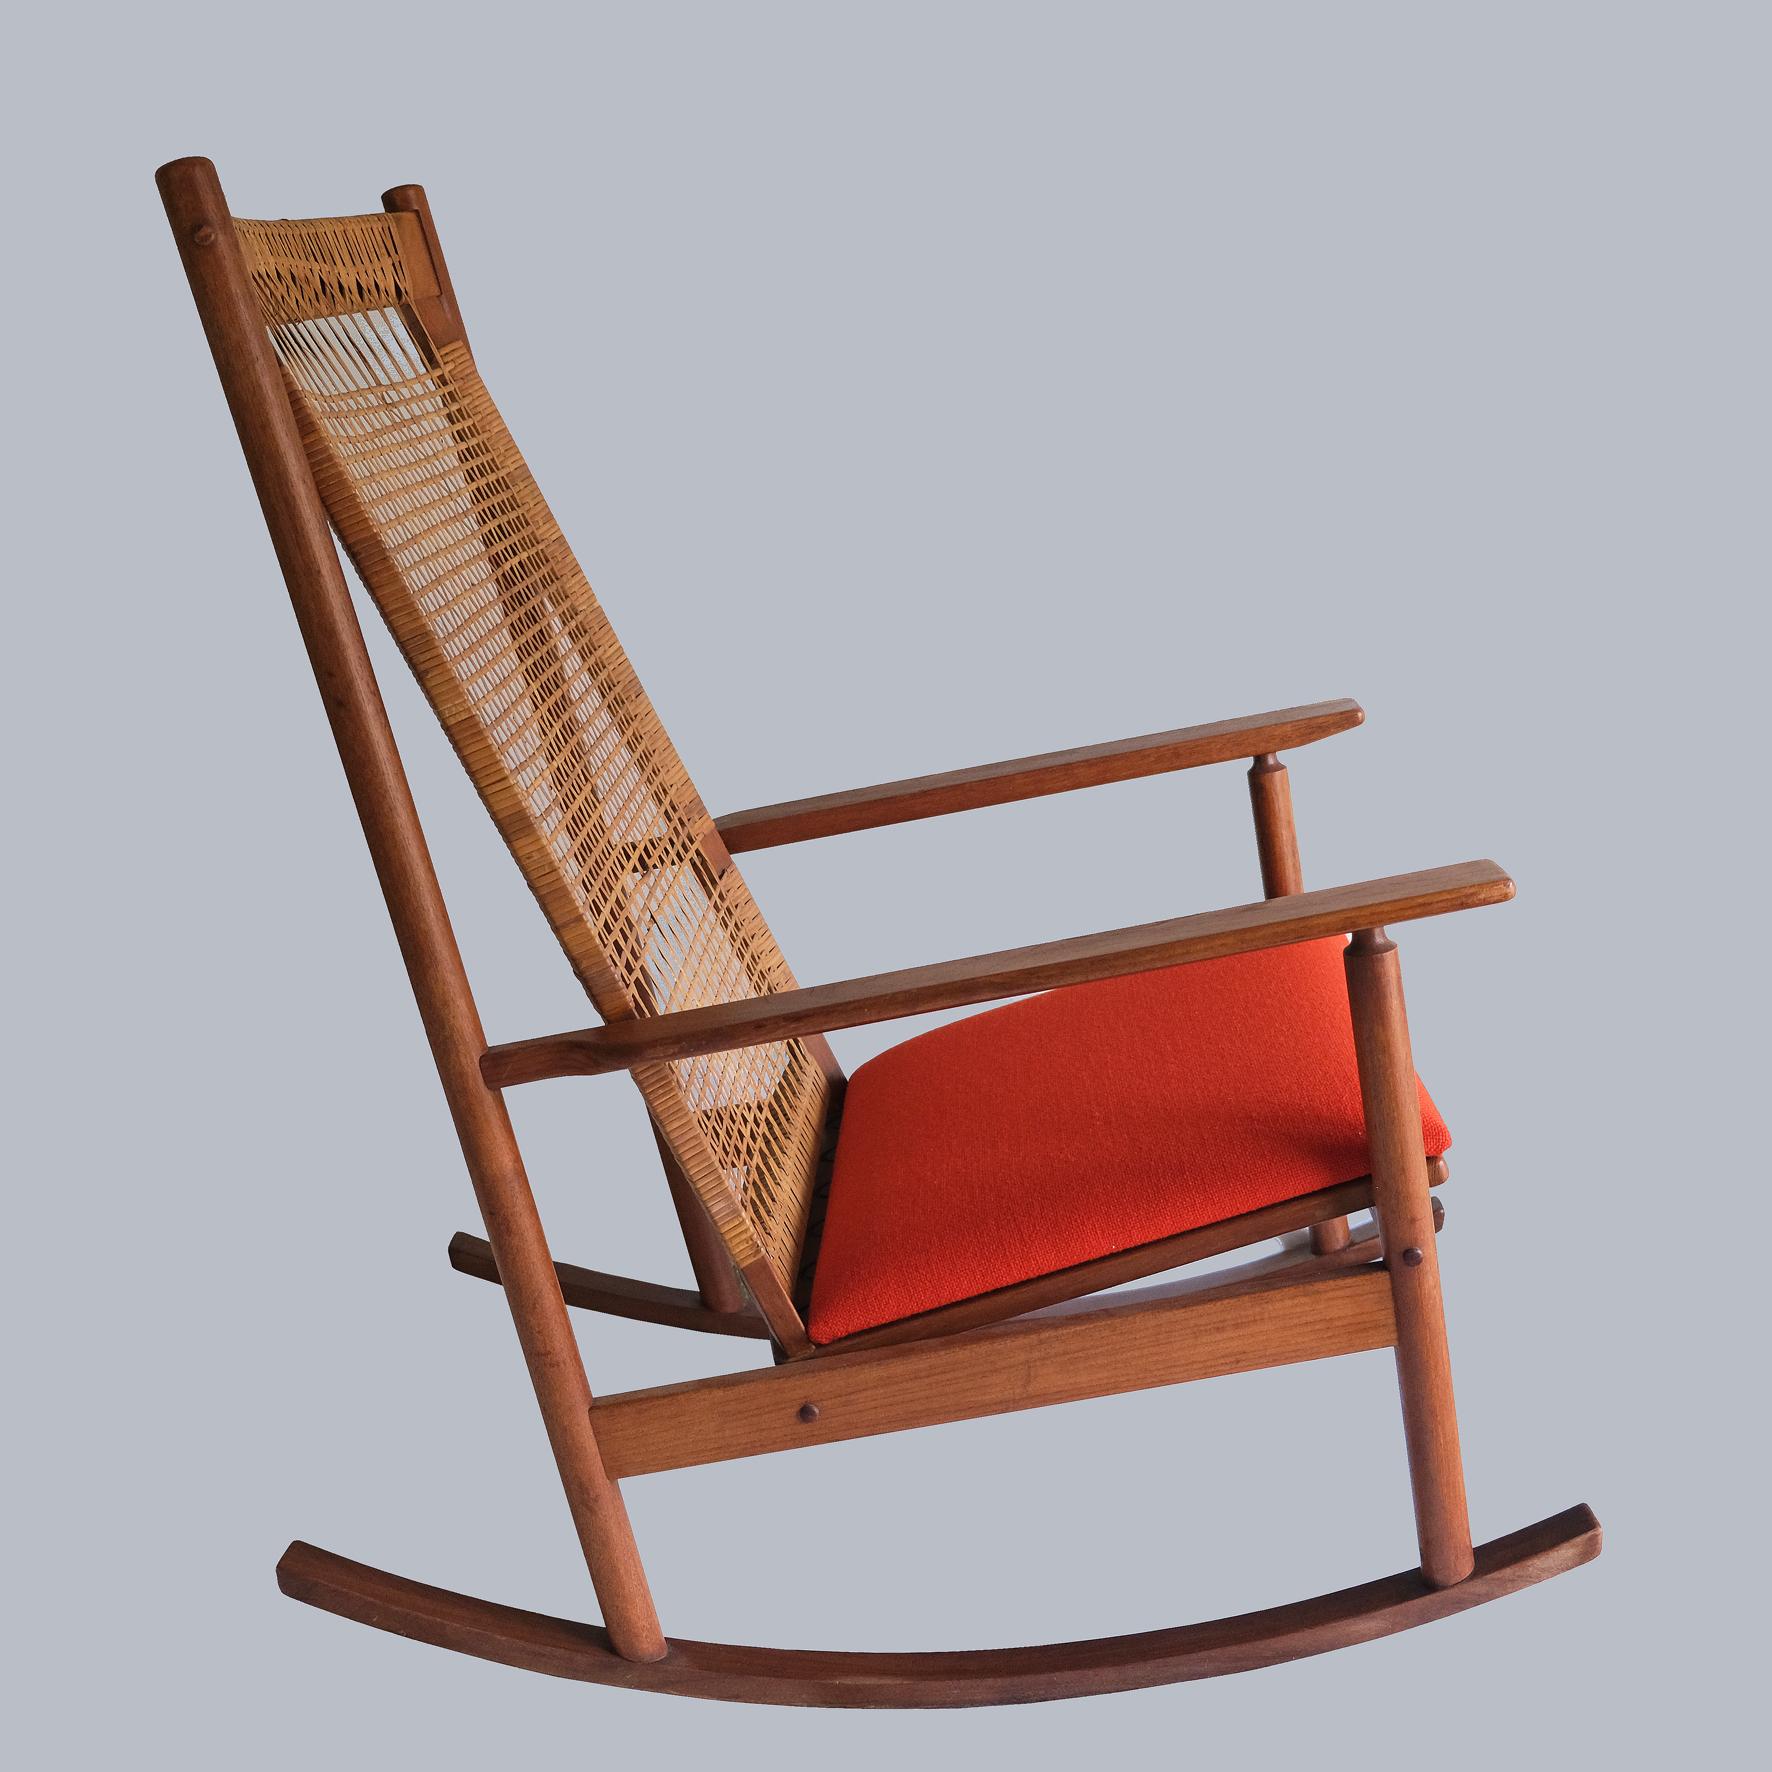 The frame made of teak, the back woven in cane, the seat upholstered with an orange fabric.
Stamped « JK, Made in Denmark », with a « Danish furniture makers control » sticker.
Produced by Juul Kristensen. 
Denmark.
1960s.
  